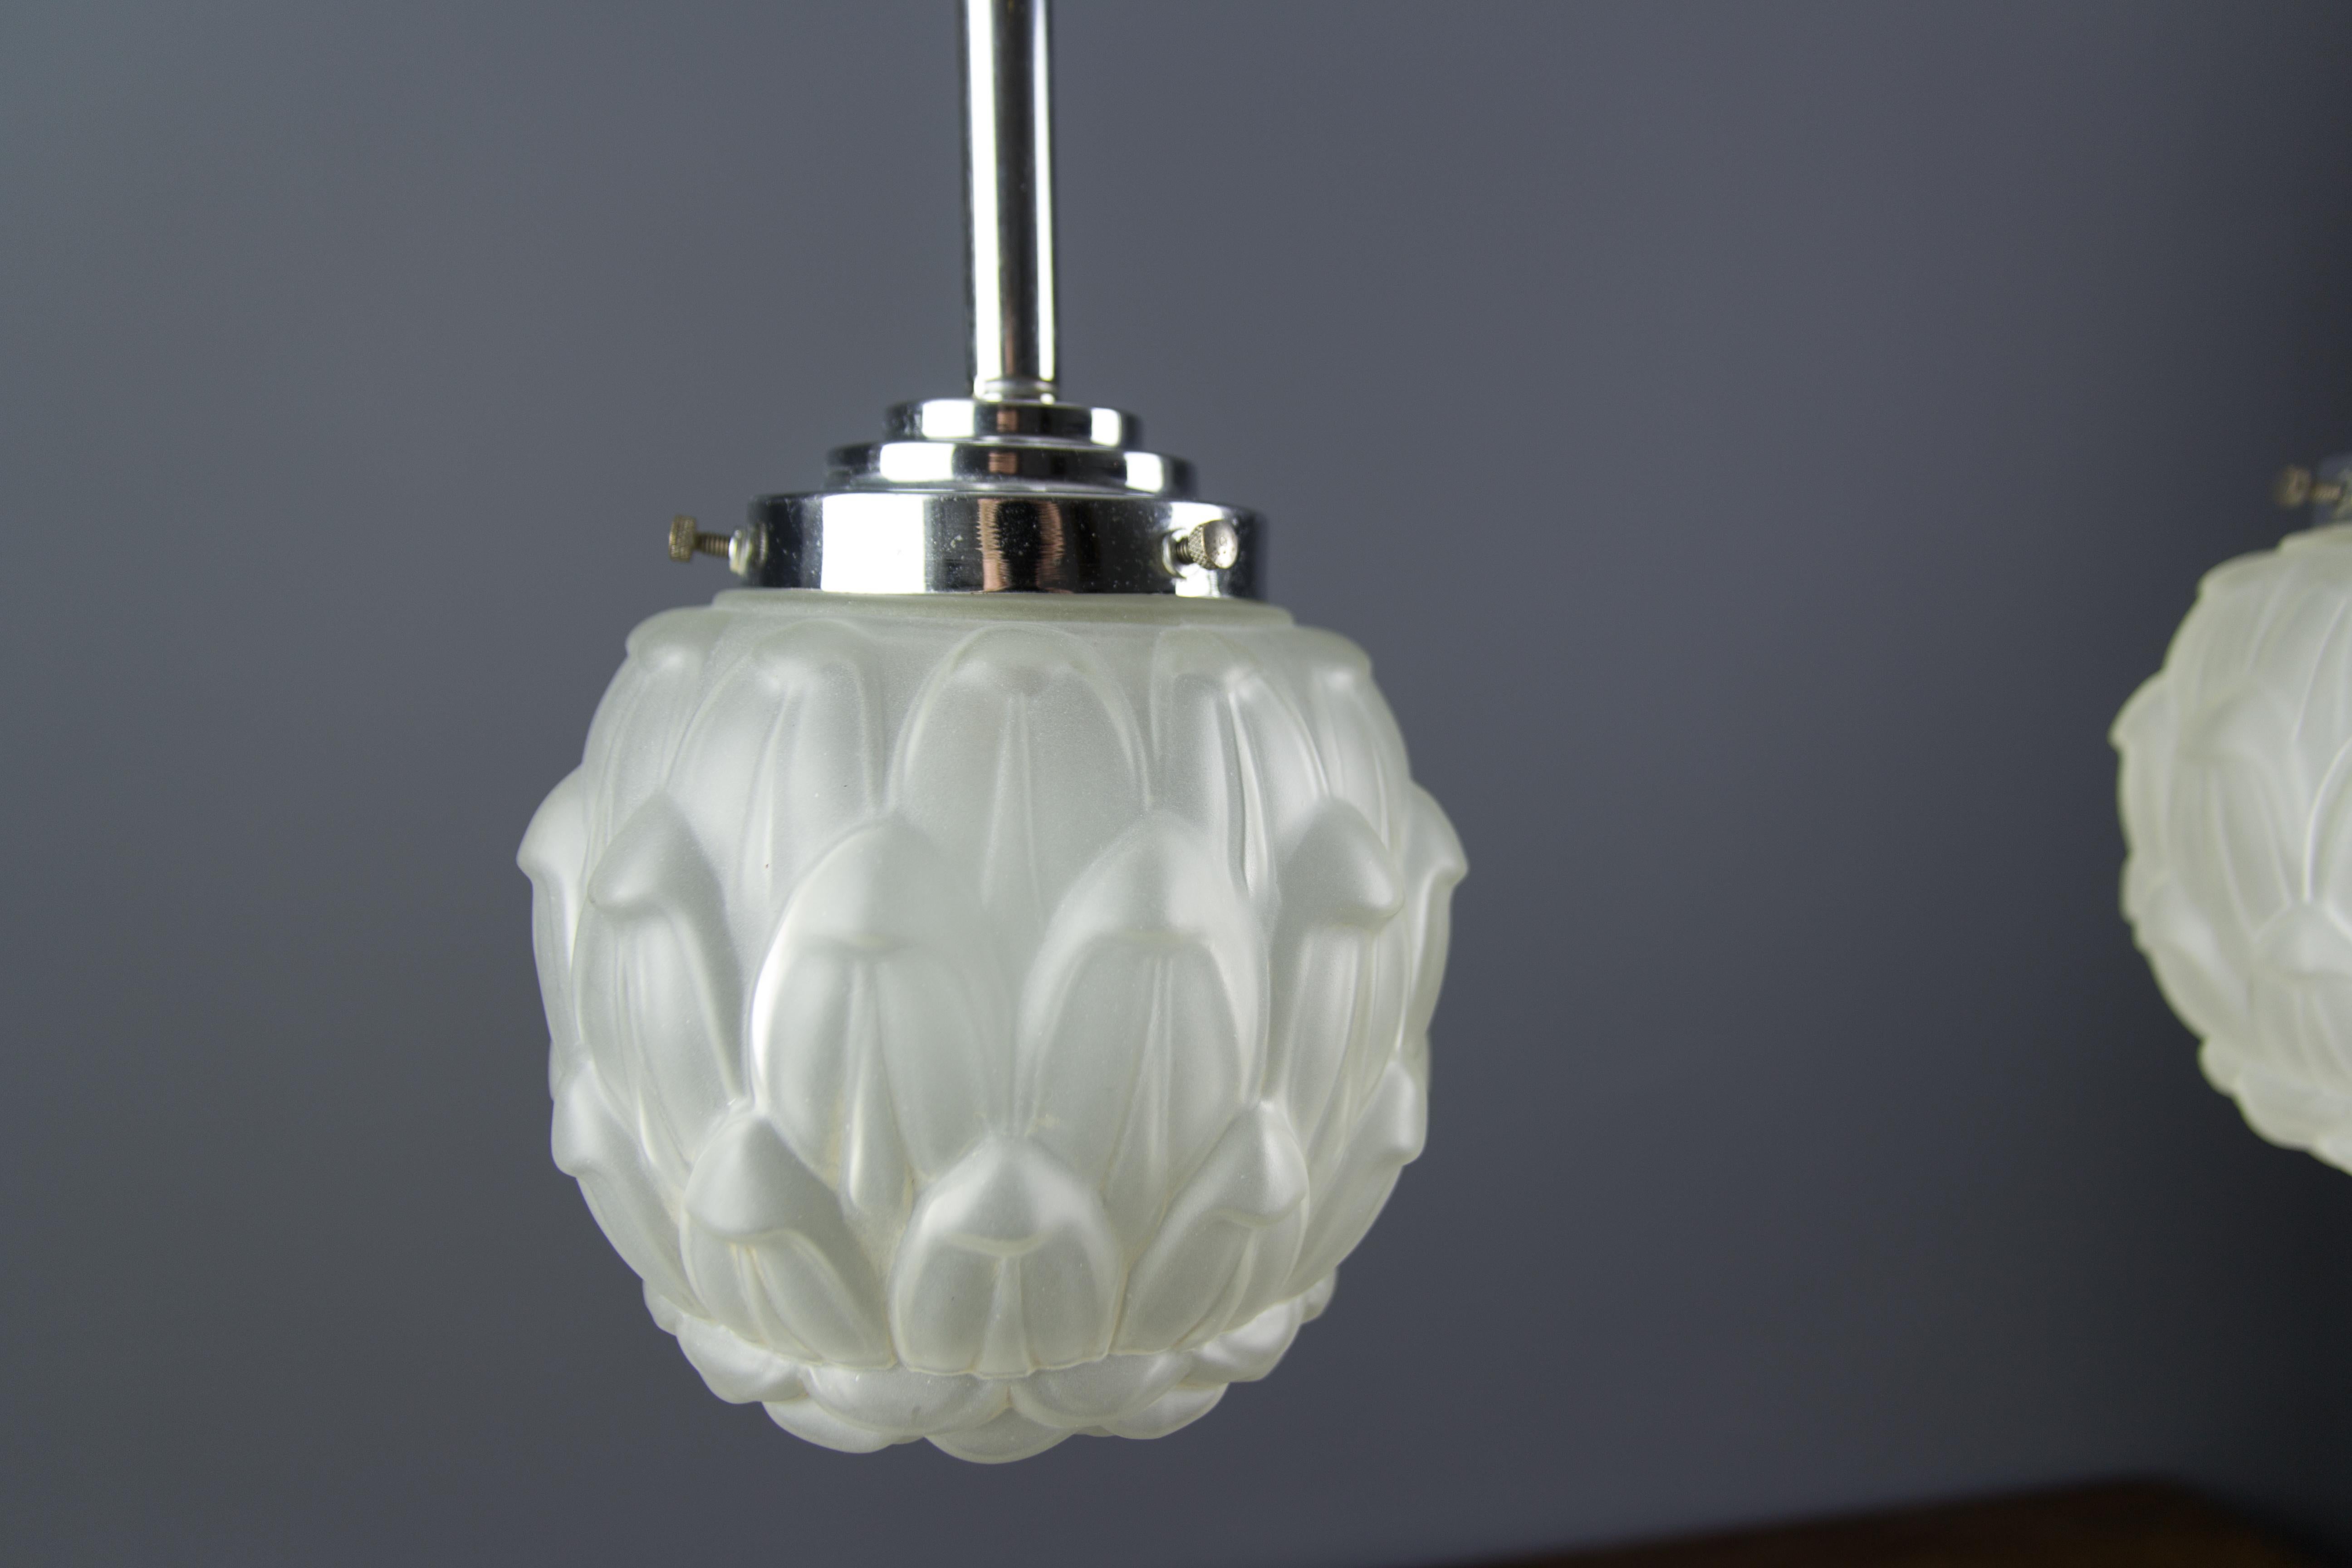 French Pair of Art Deco White Frosted Glass and Chrome Pendant Ceiling Lights, 1930s